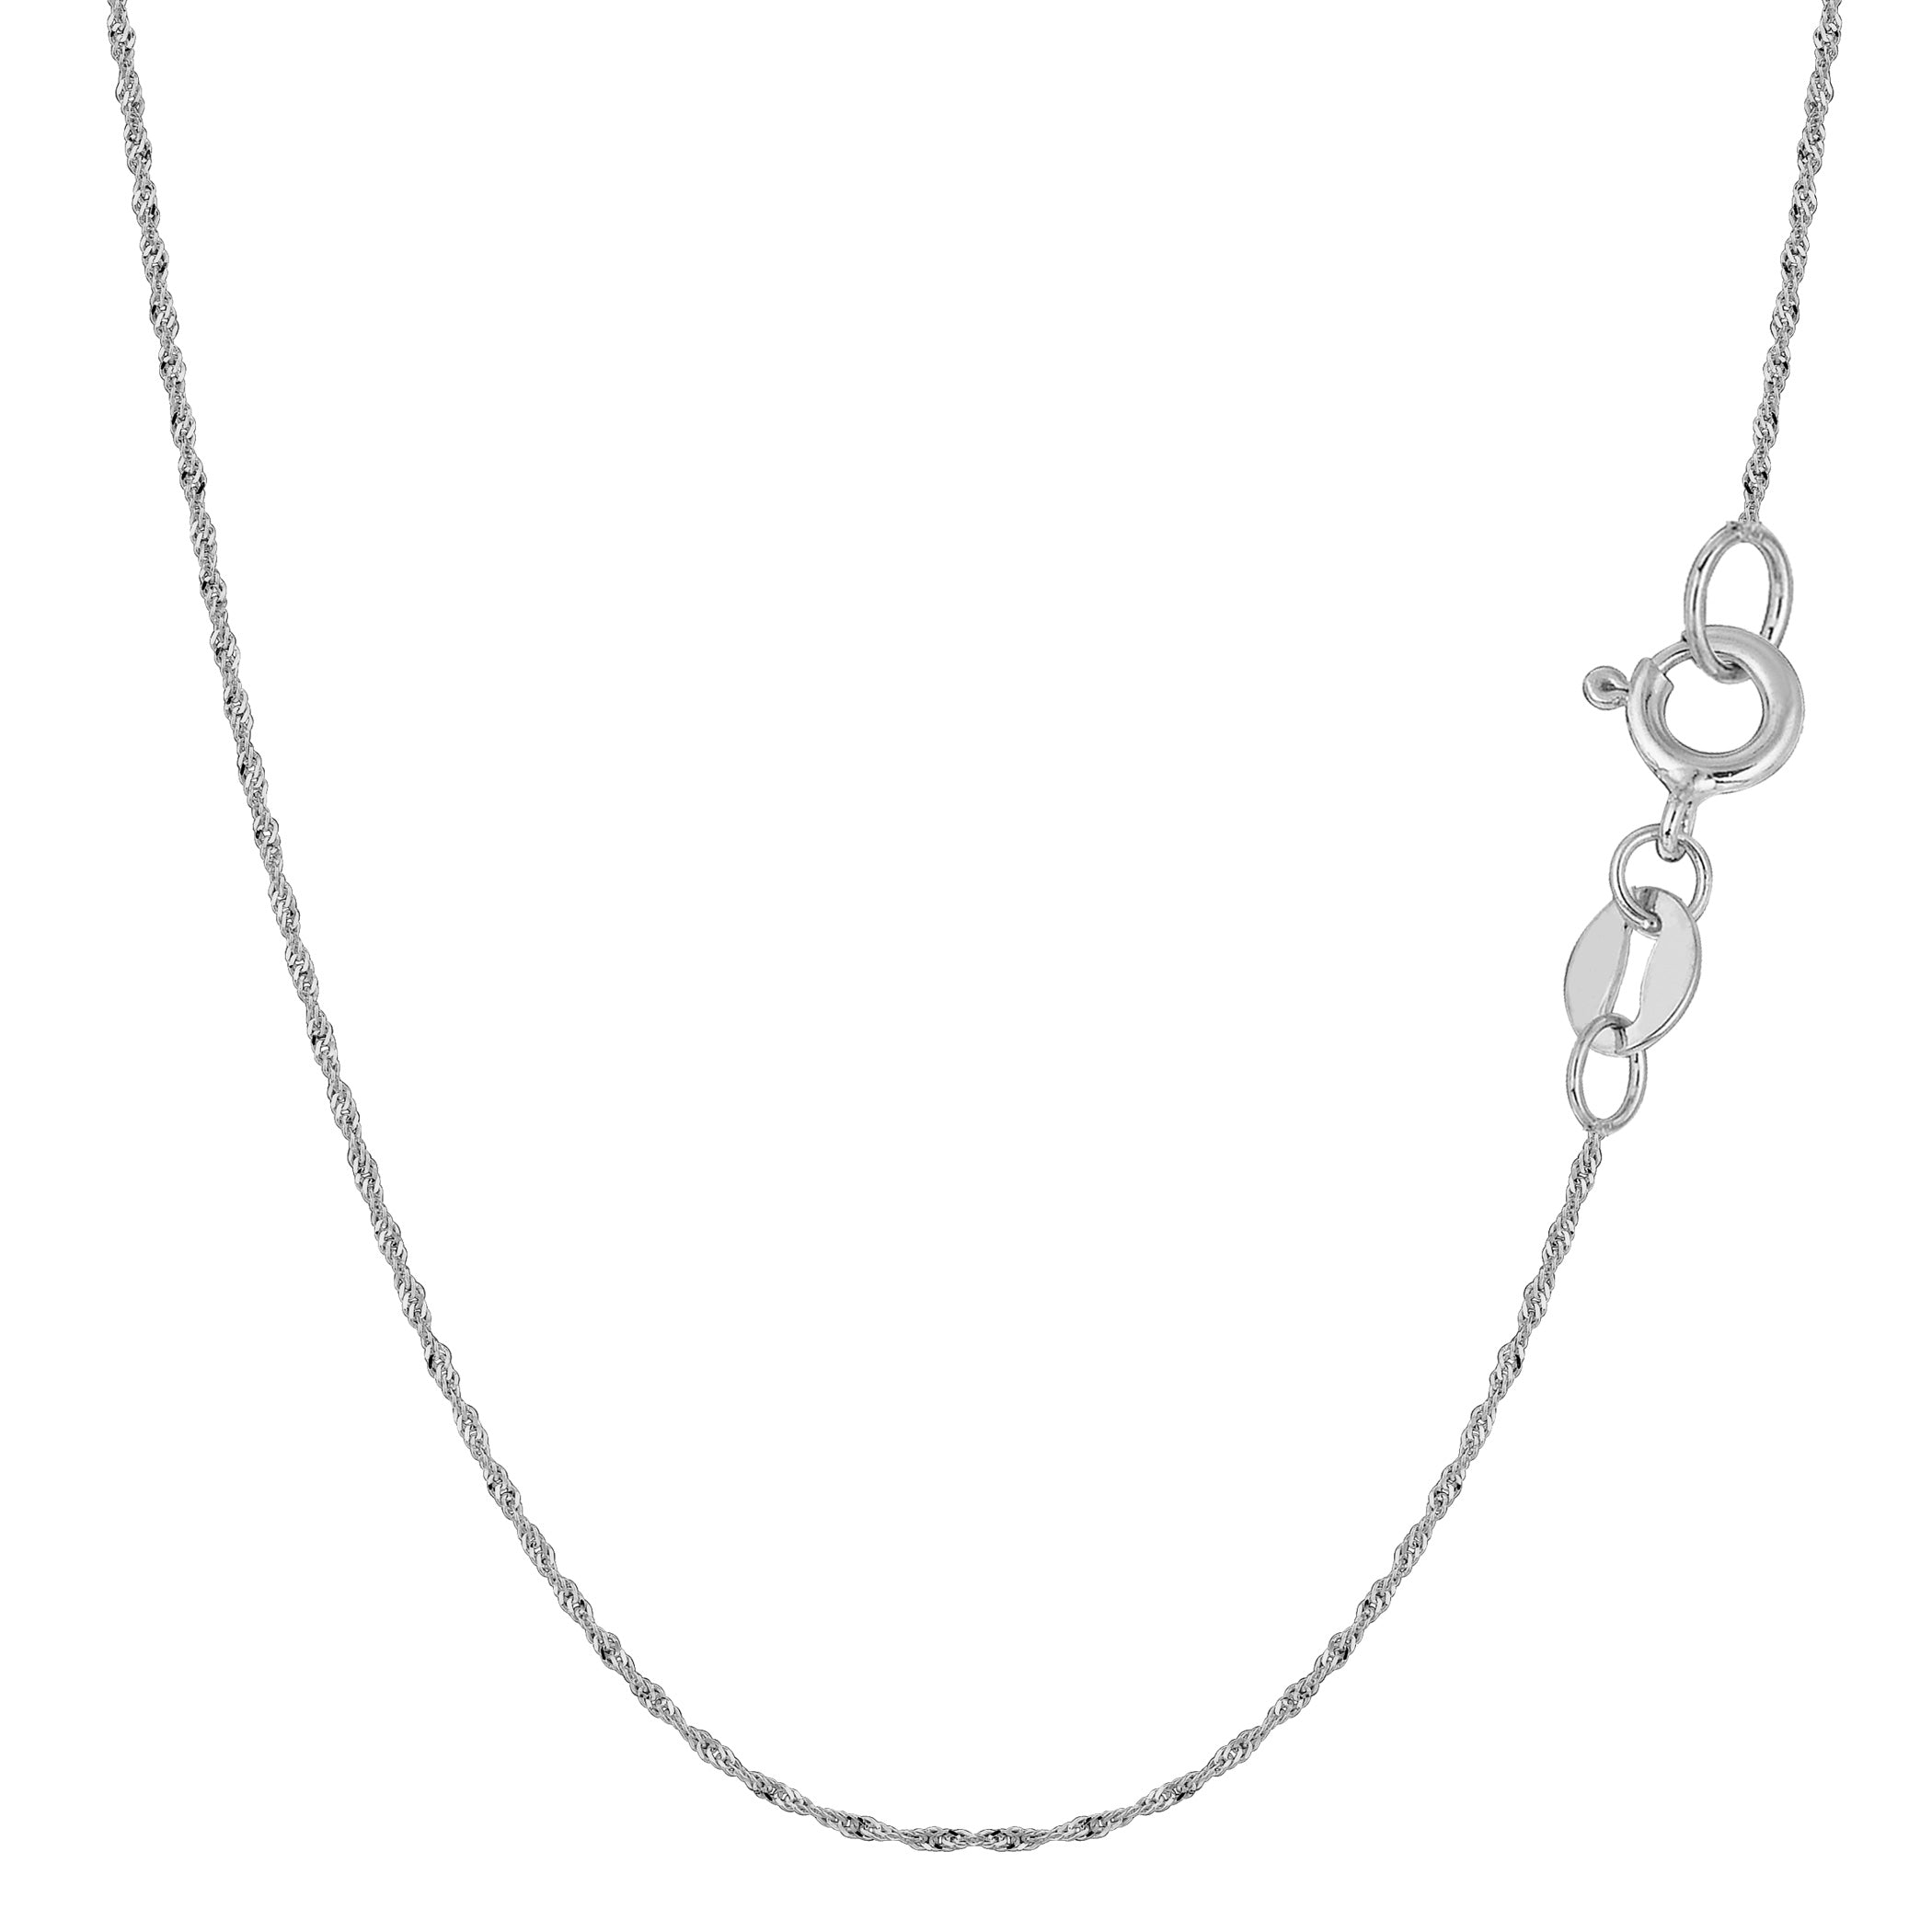 10k White Gold Singapore Chain Necklace, 0.8mm